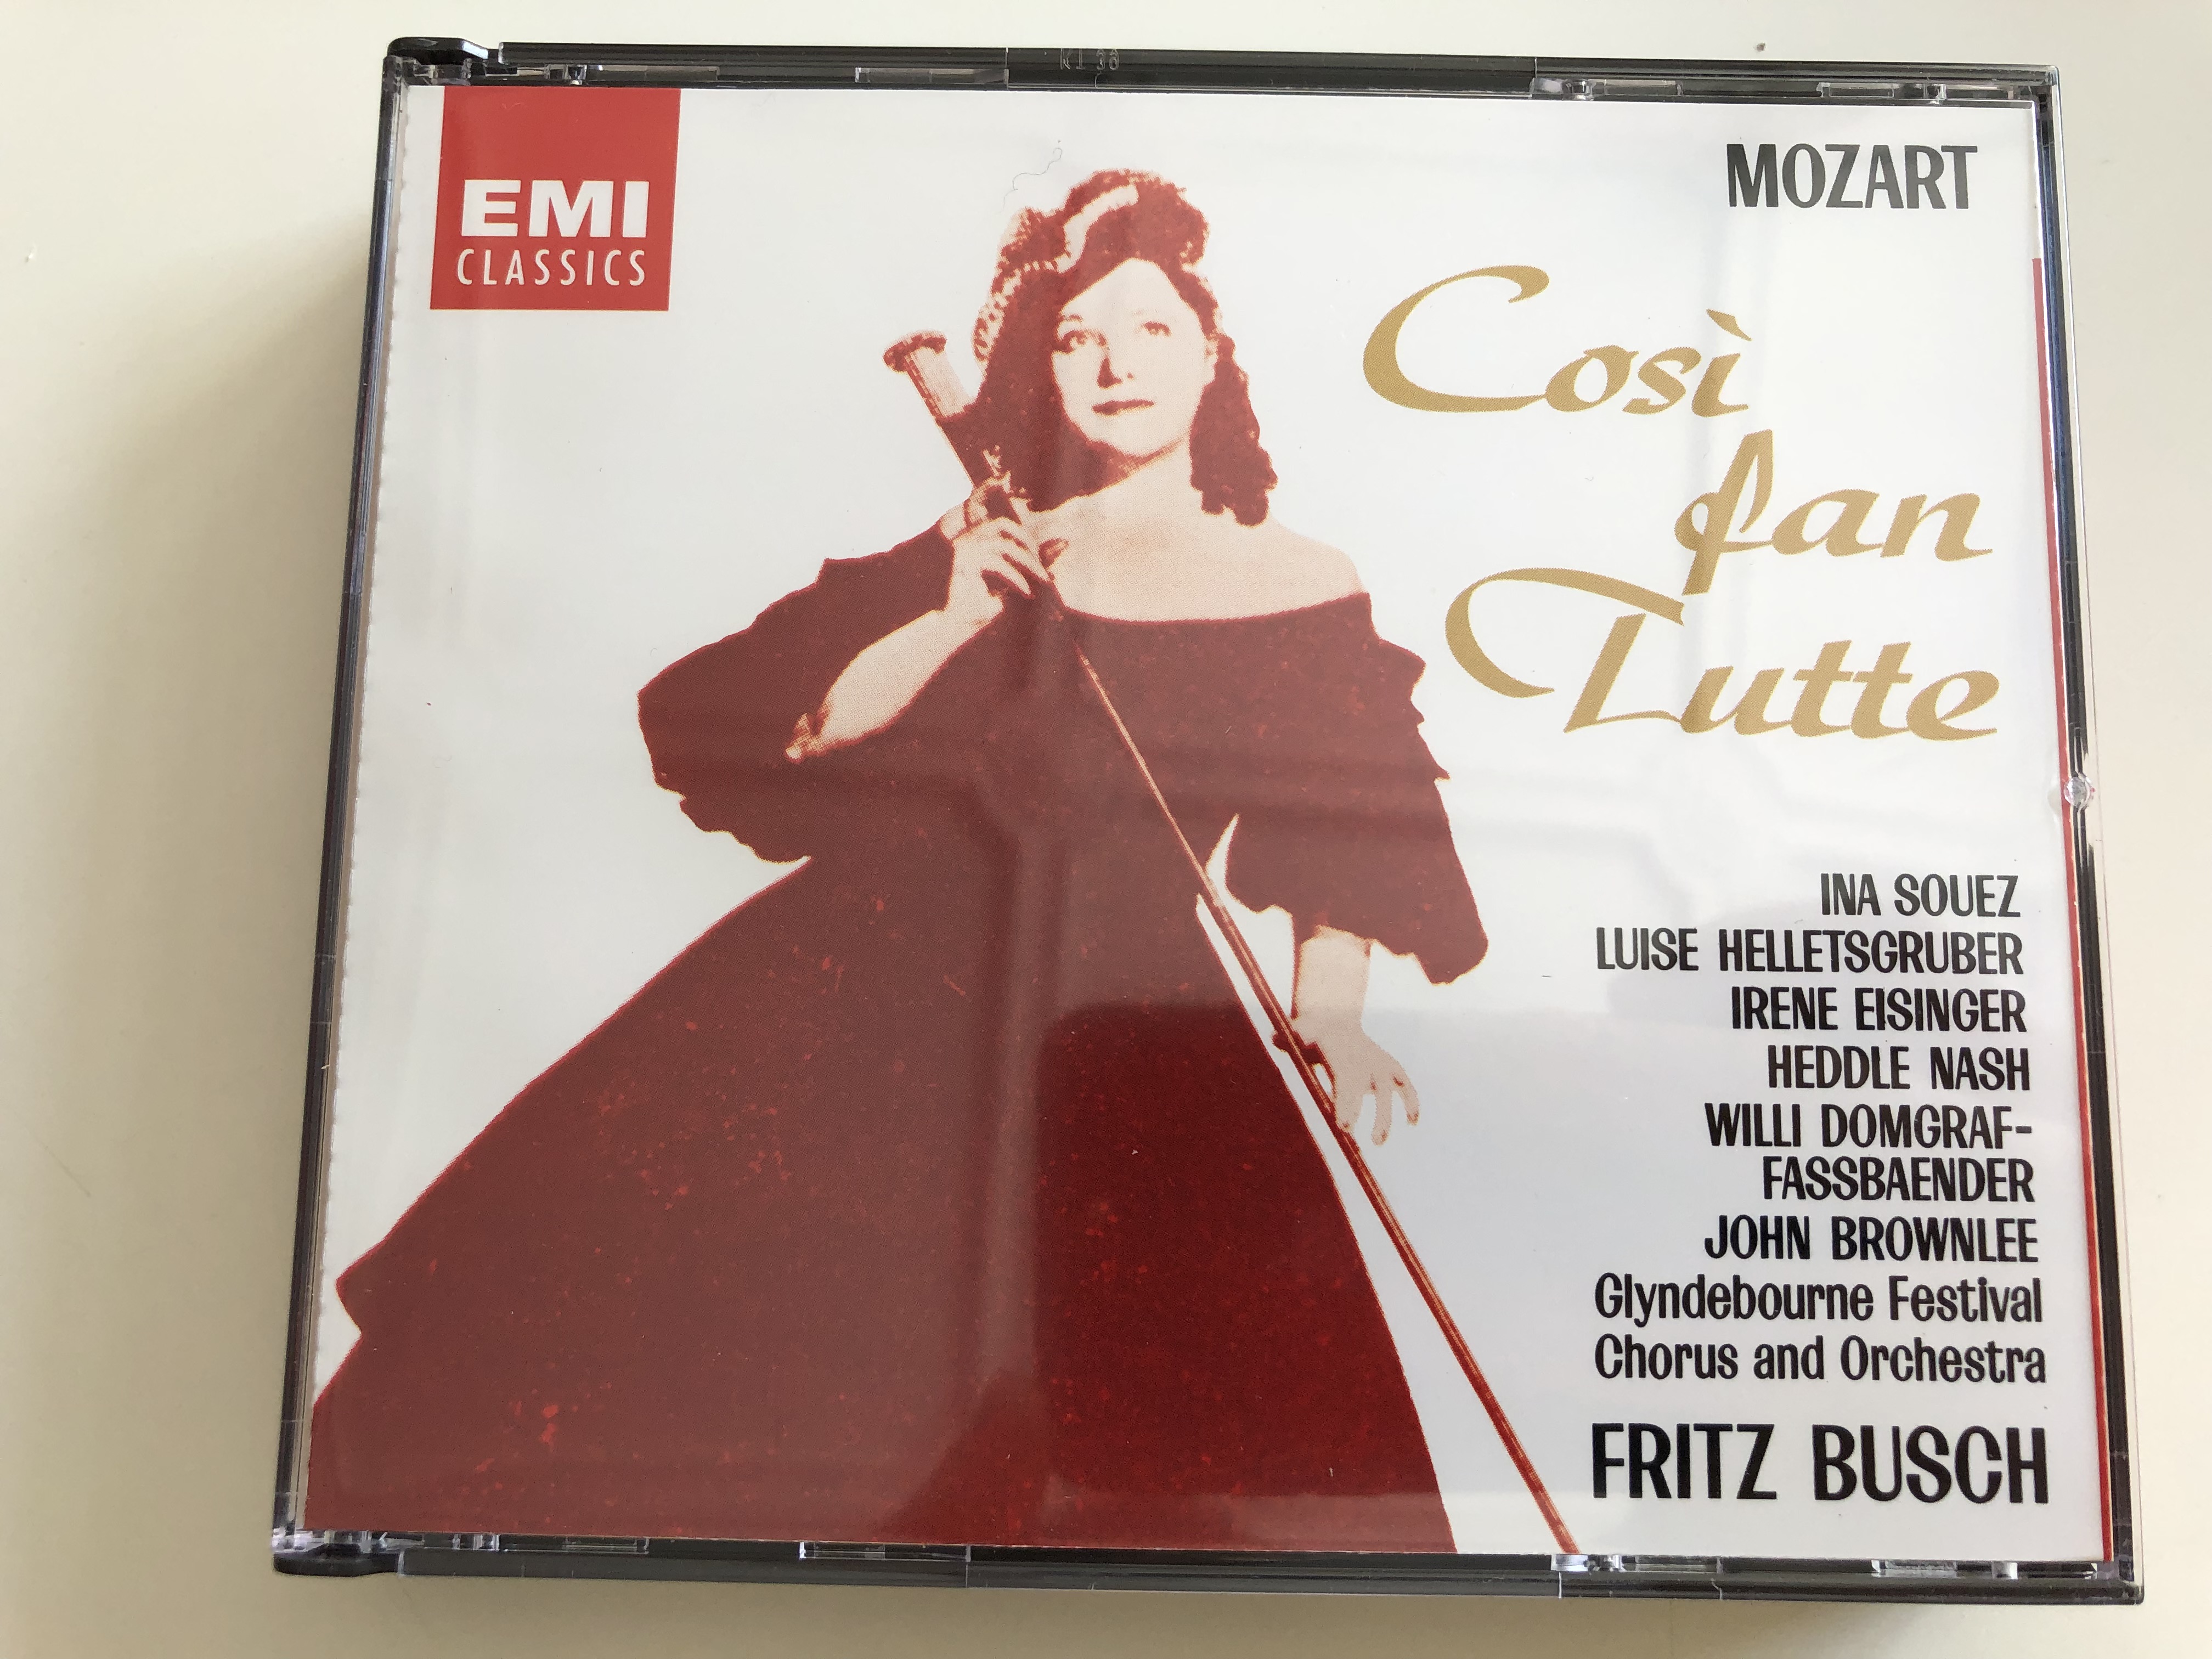 mozart-cosi-fan-tutte-2-cd-na-souez-luise-helletsgruber-irene-eisinger-heddle-nash-glyndebourne-festival-chorus-and-orchestra-conducted-by-fritz-busch-emi-classics-audio-cd-1991-cdhb-63864-1-.jpg